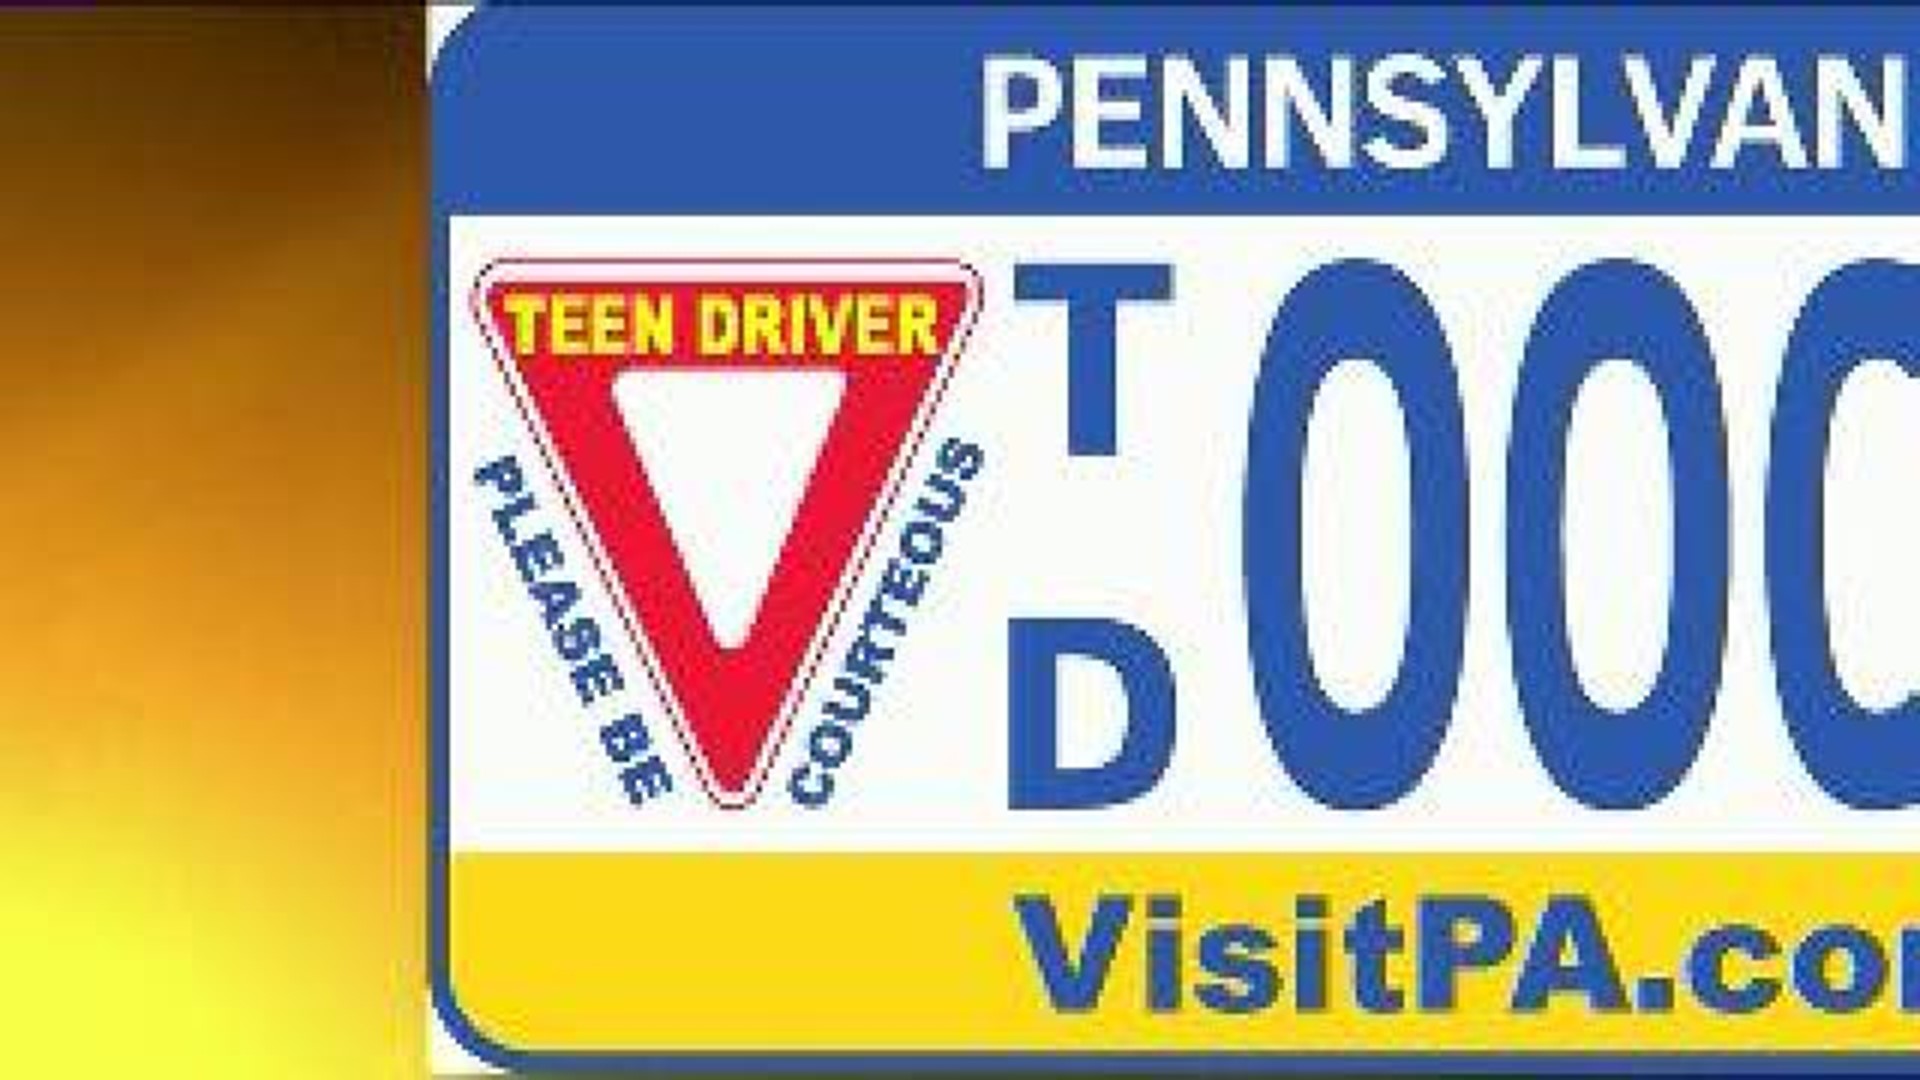 New PA License Plates Label Teen Drivers